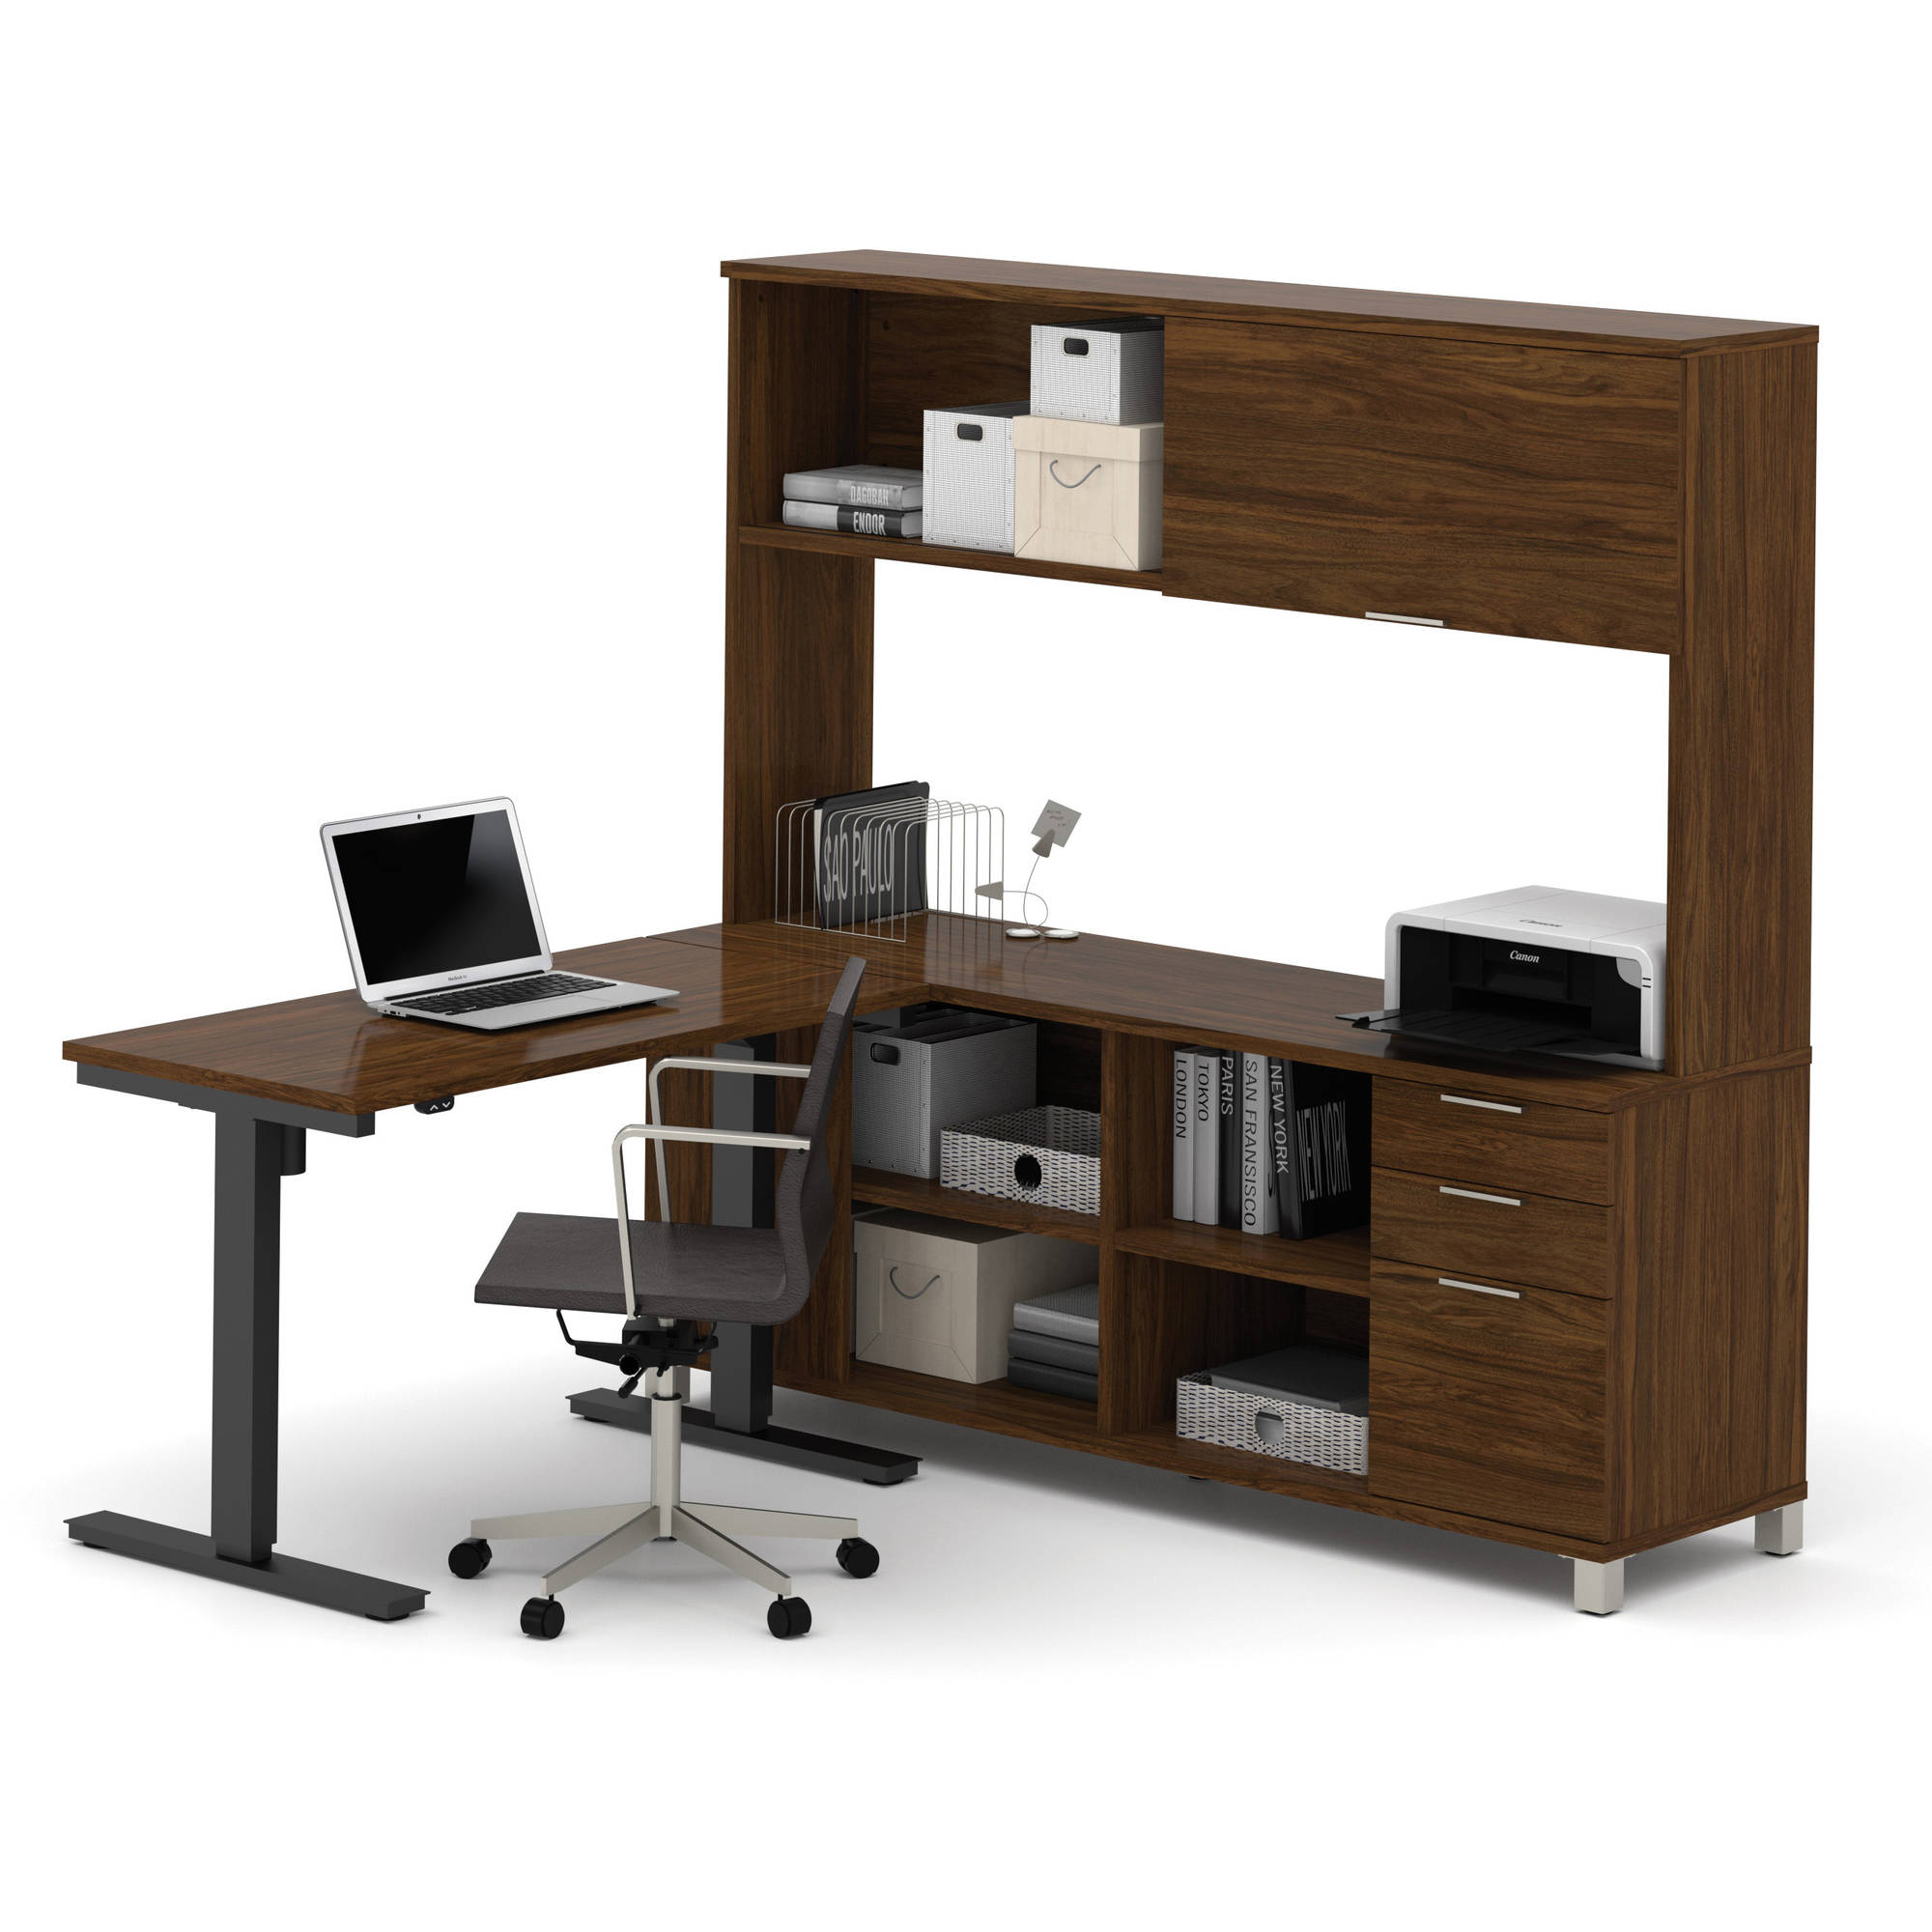 Bestar Pro-Linea L-Desk with Hutch Including Electric Height Adjustable Table, Multiple Colors - image 2 of 3